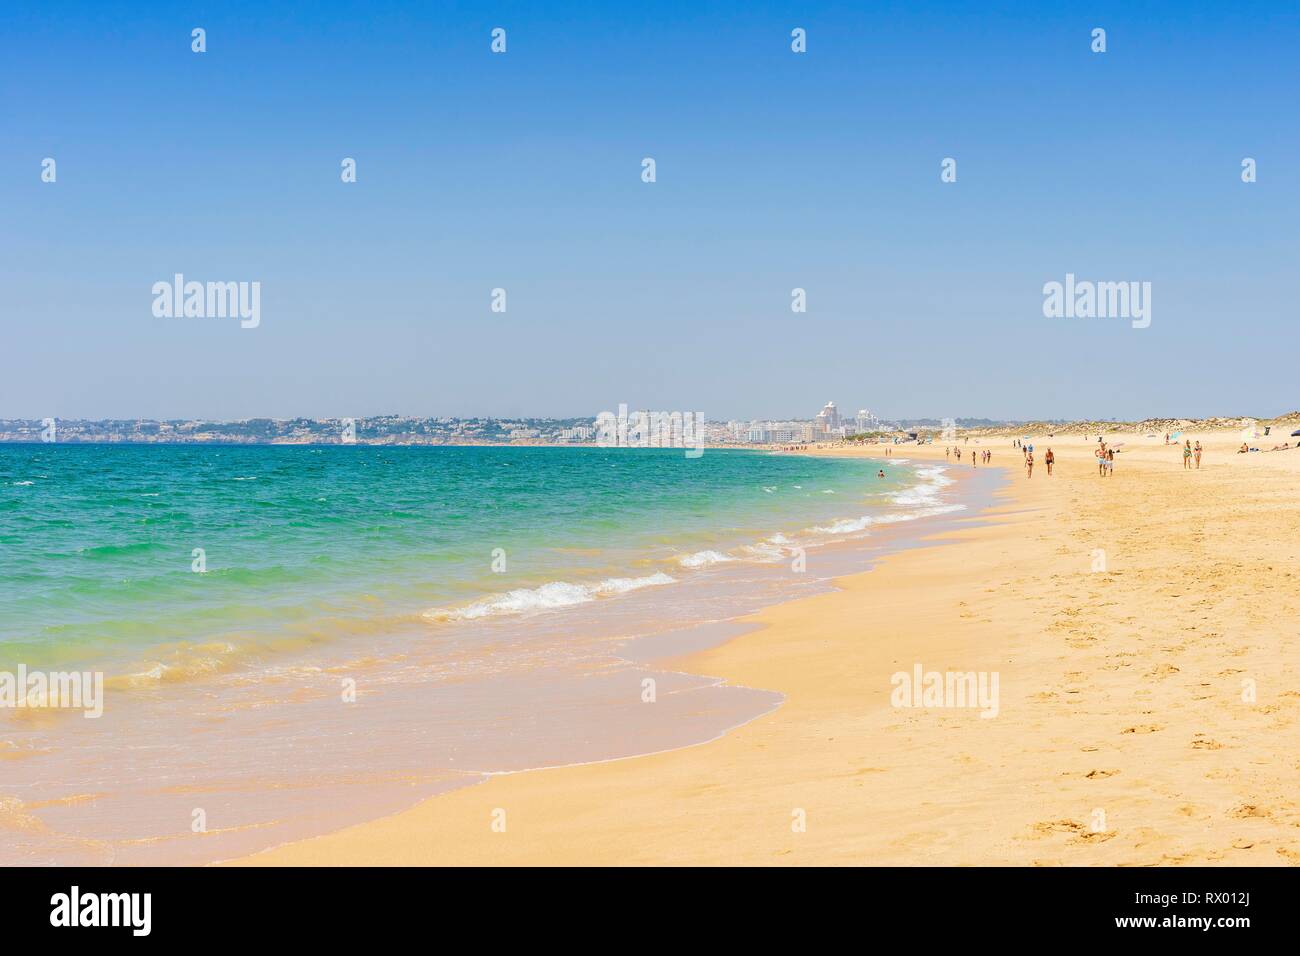 People relaxing on the beach next to Armacao de Pera, Algarve, Portugal Stock Photo